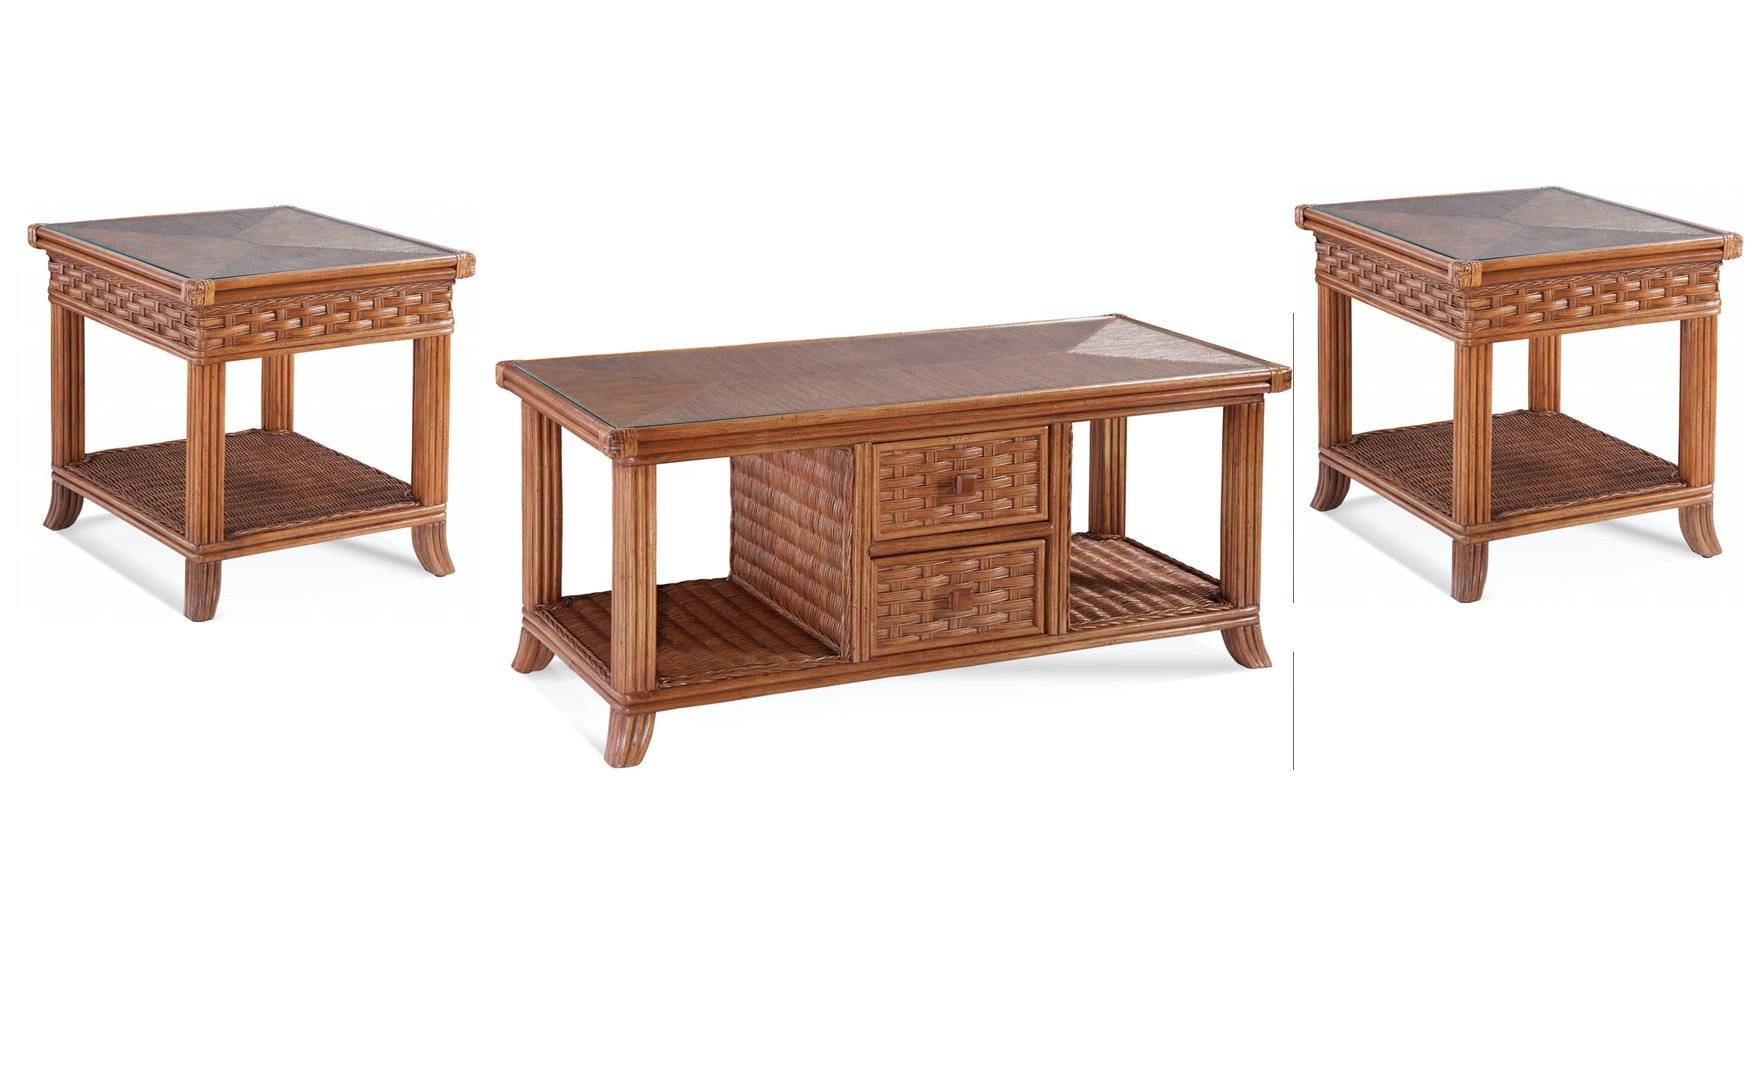 Somerset Rattan 3 Pc Set with Coffee Table and 2 End Tables Model 953-071-072 by Braxton Culler